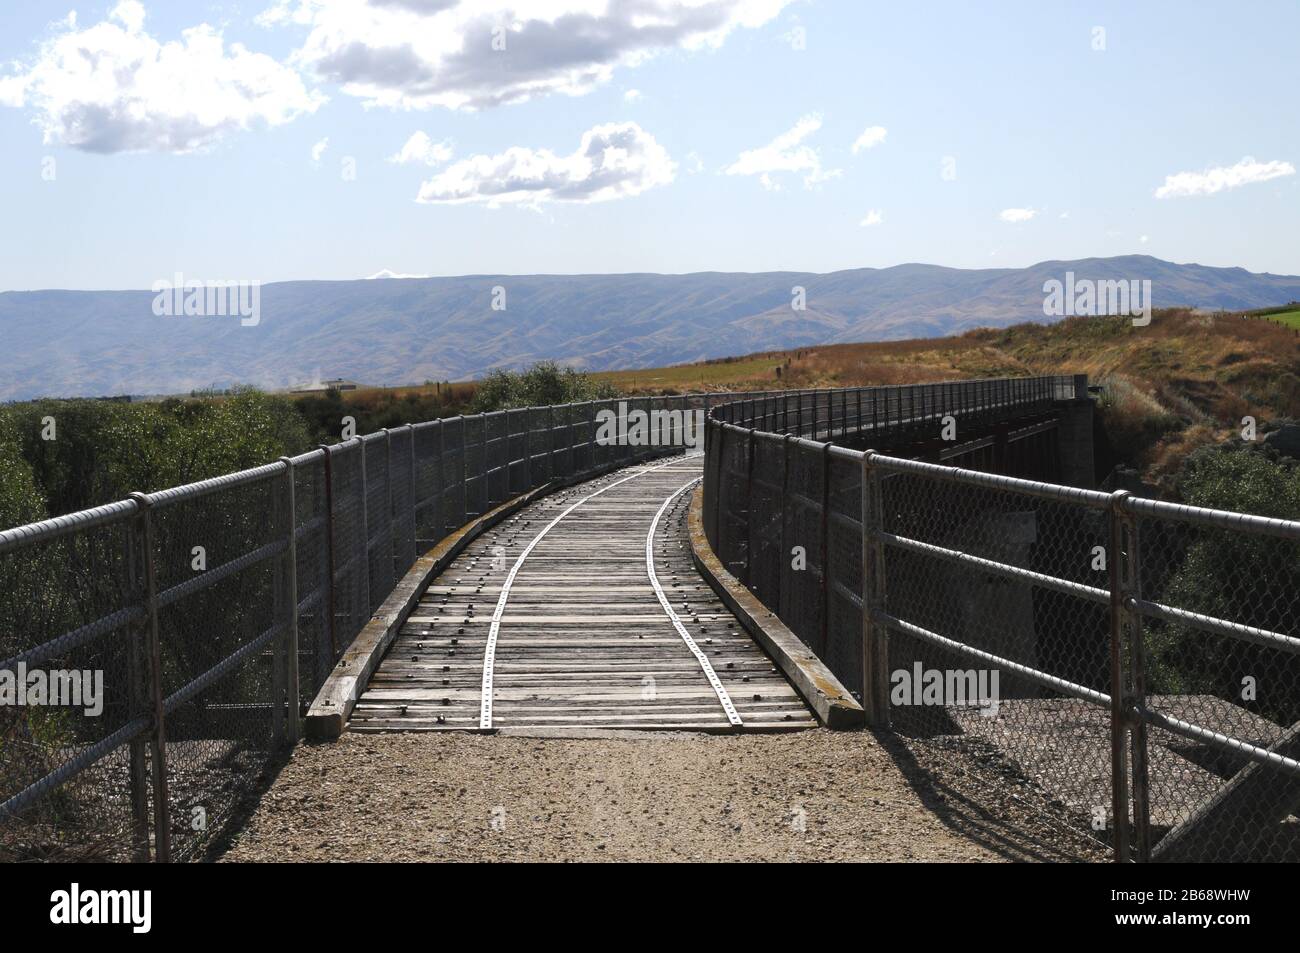 The Central Otago Rail Trail crosses a bridge over a gorge near the township of Lauder. The Trail is a multi day cycle ride or hike. Stock Photo